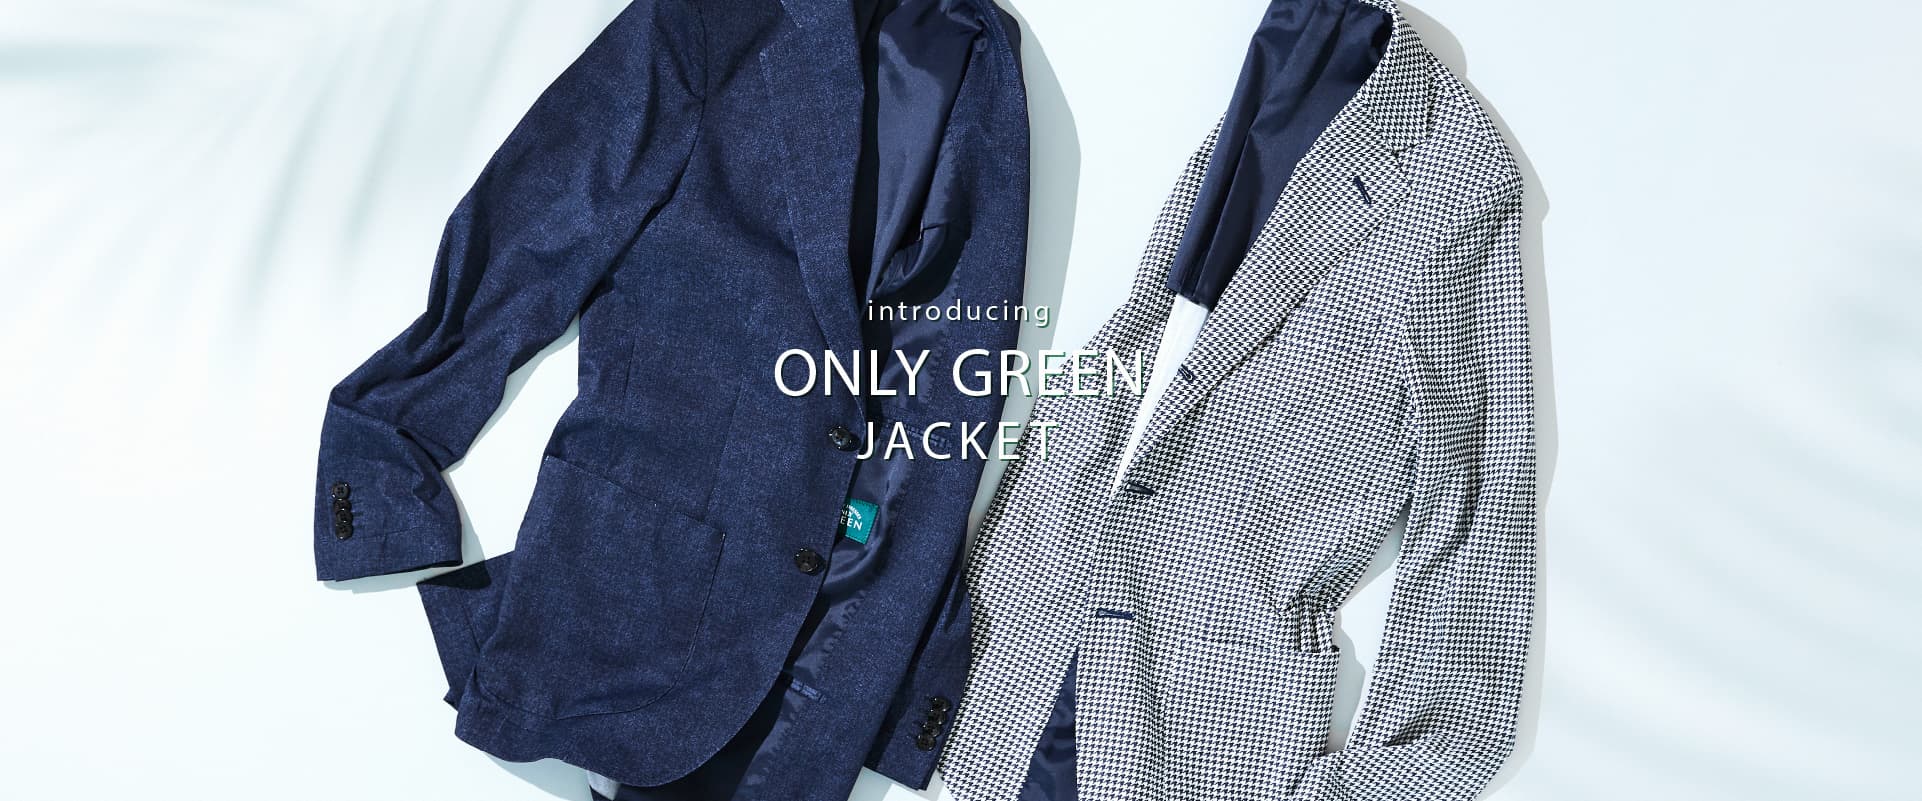 introducing ONLY GREEN JACKET